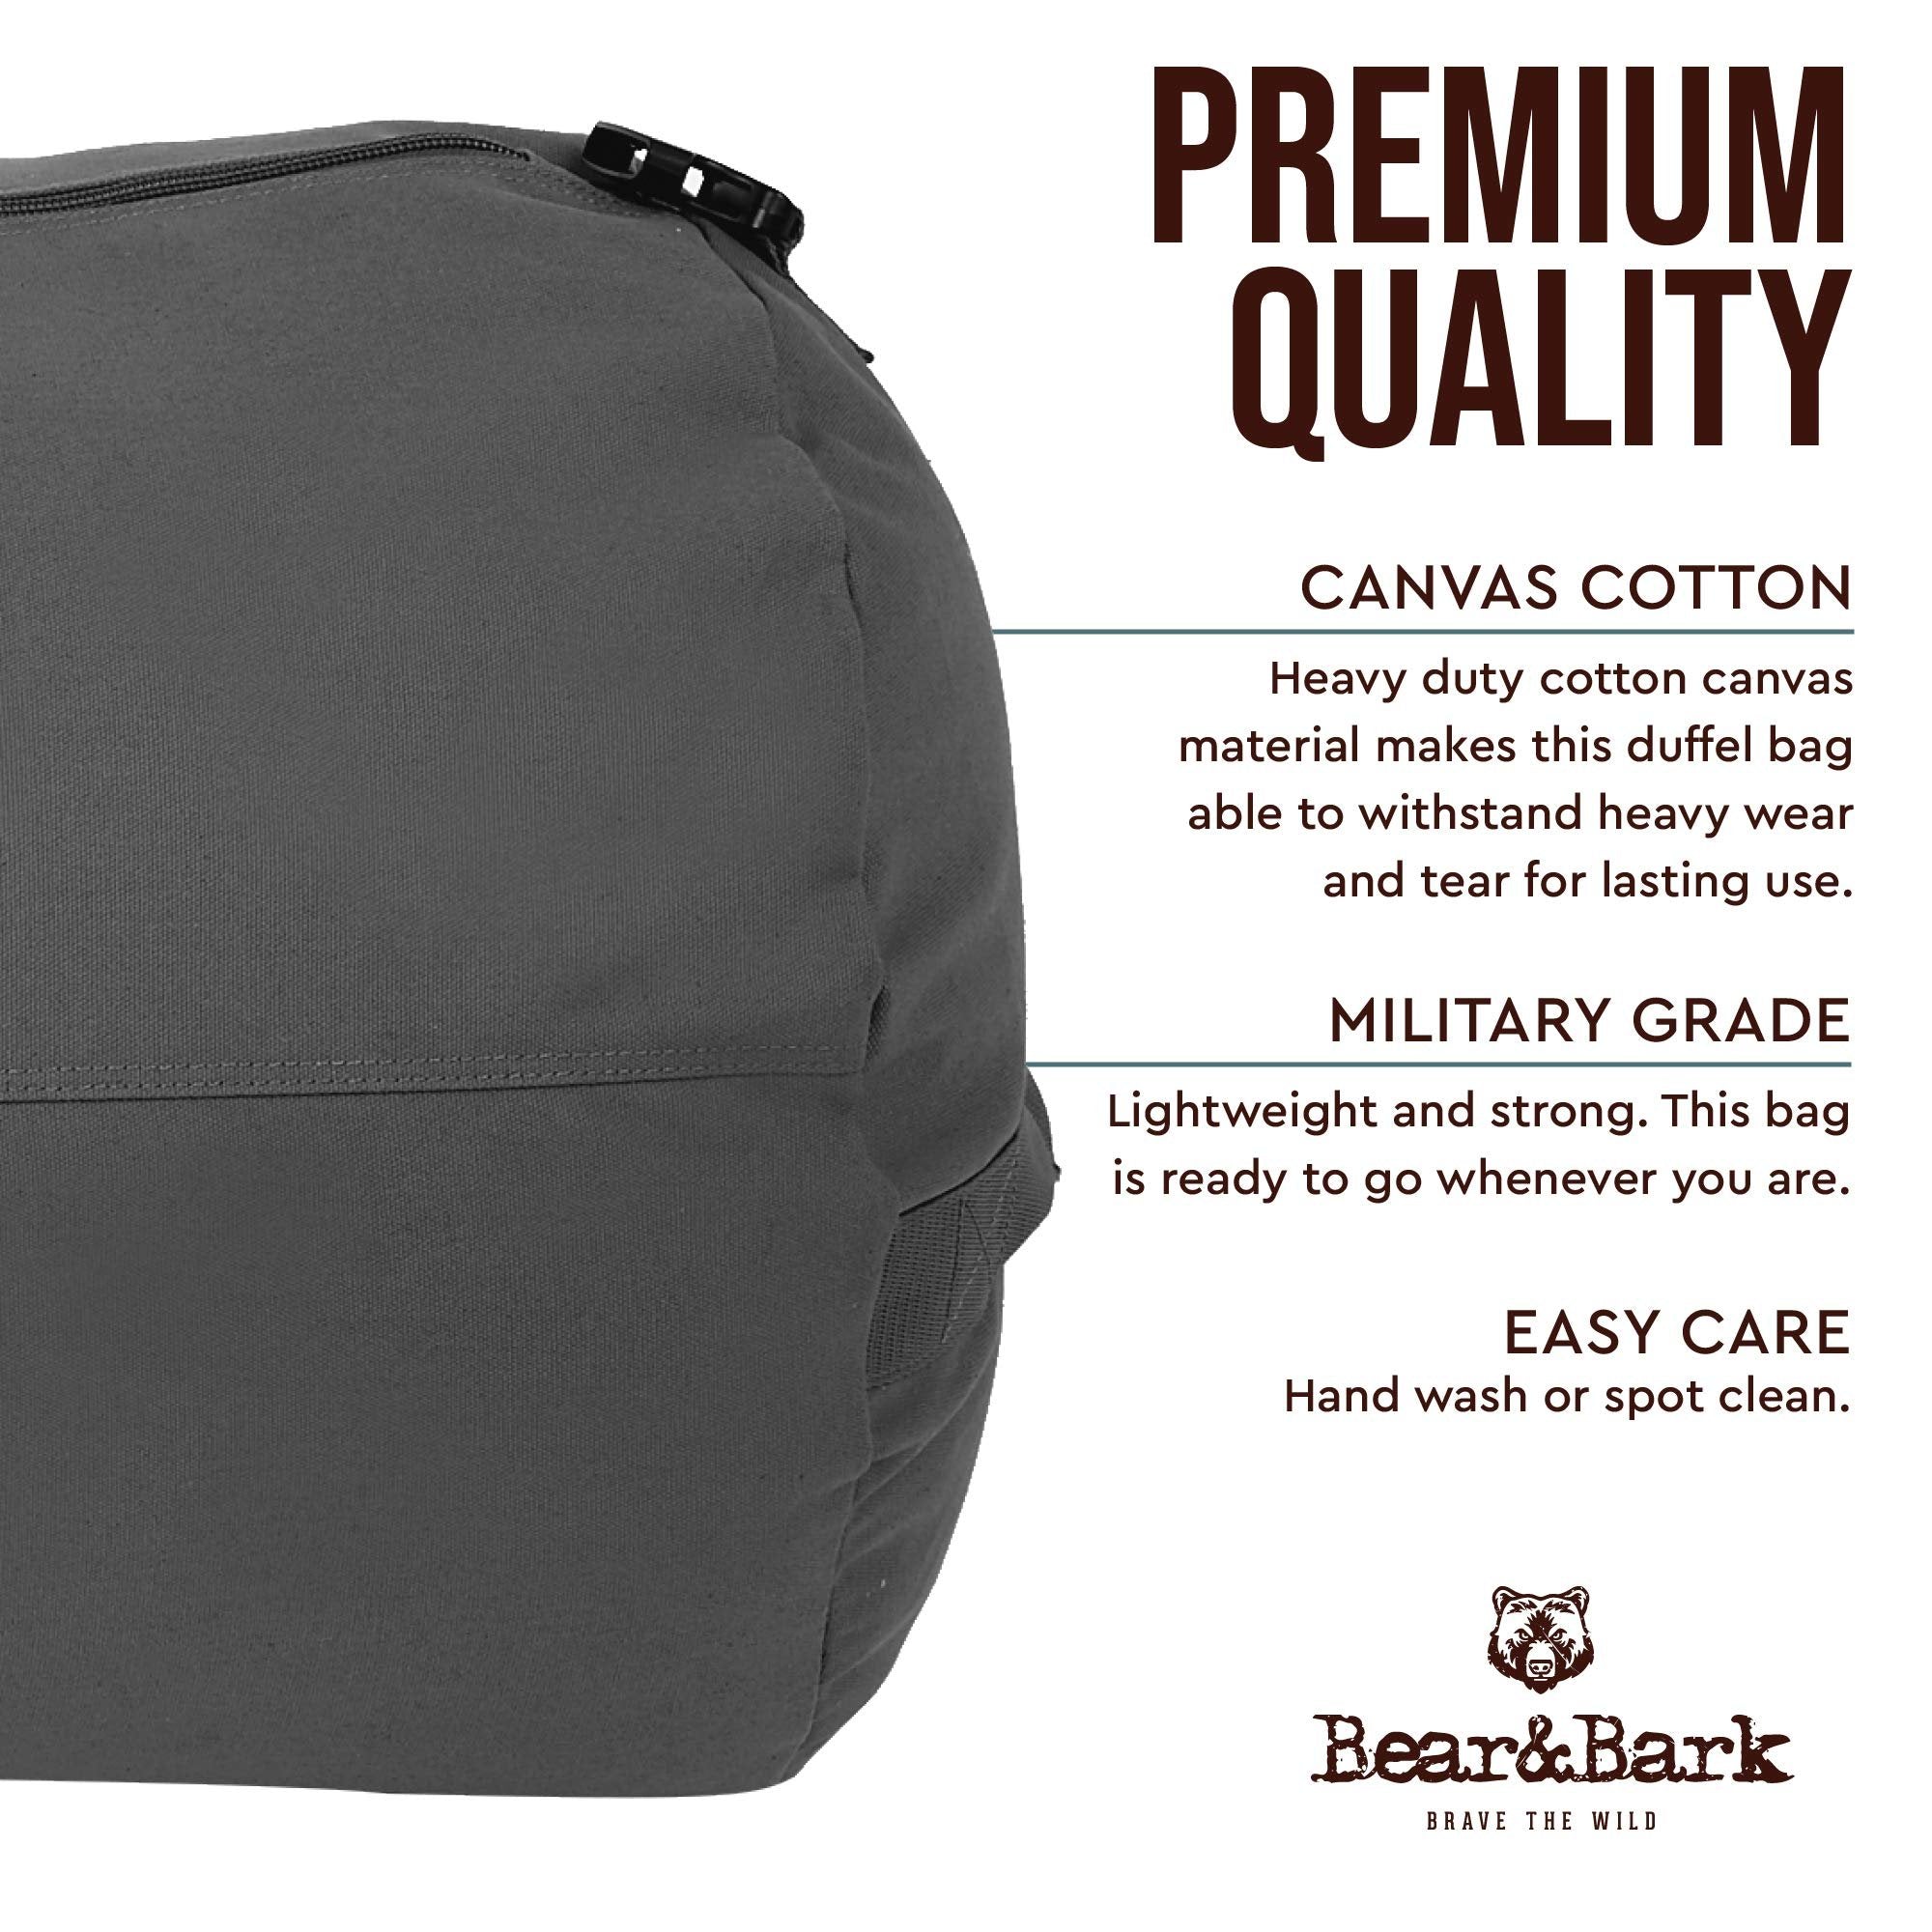 Bear&Bark X-Large Gray Canvas Duffle Bag - 46" X 20" - 236.8L - Military Style for Men and Women - College, Backpacking, Travel